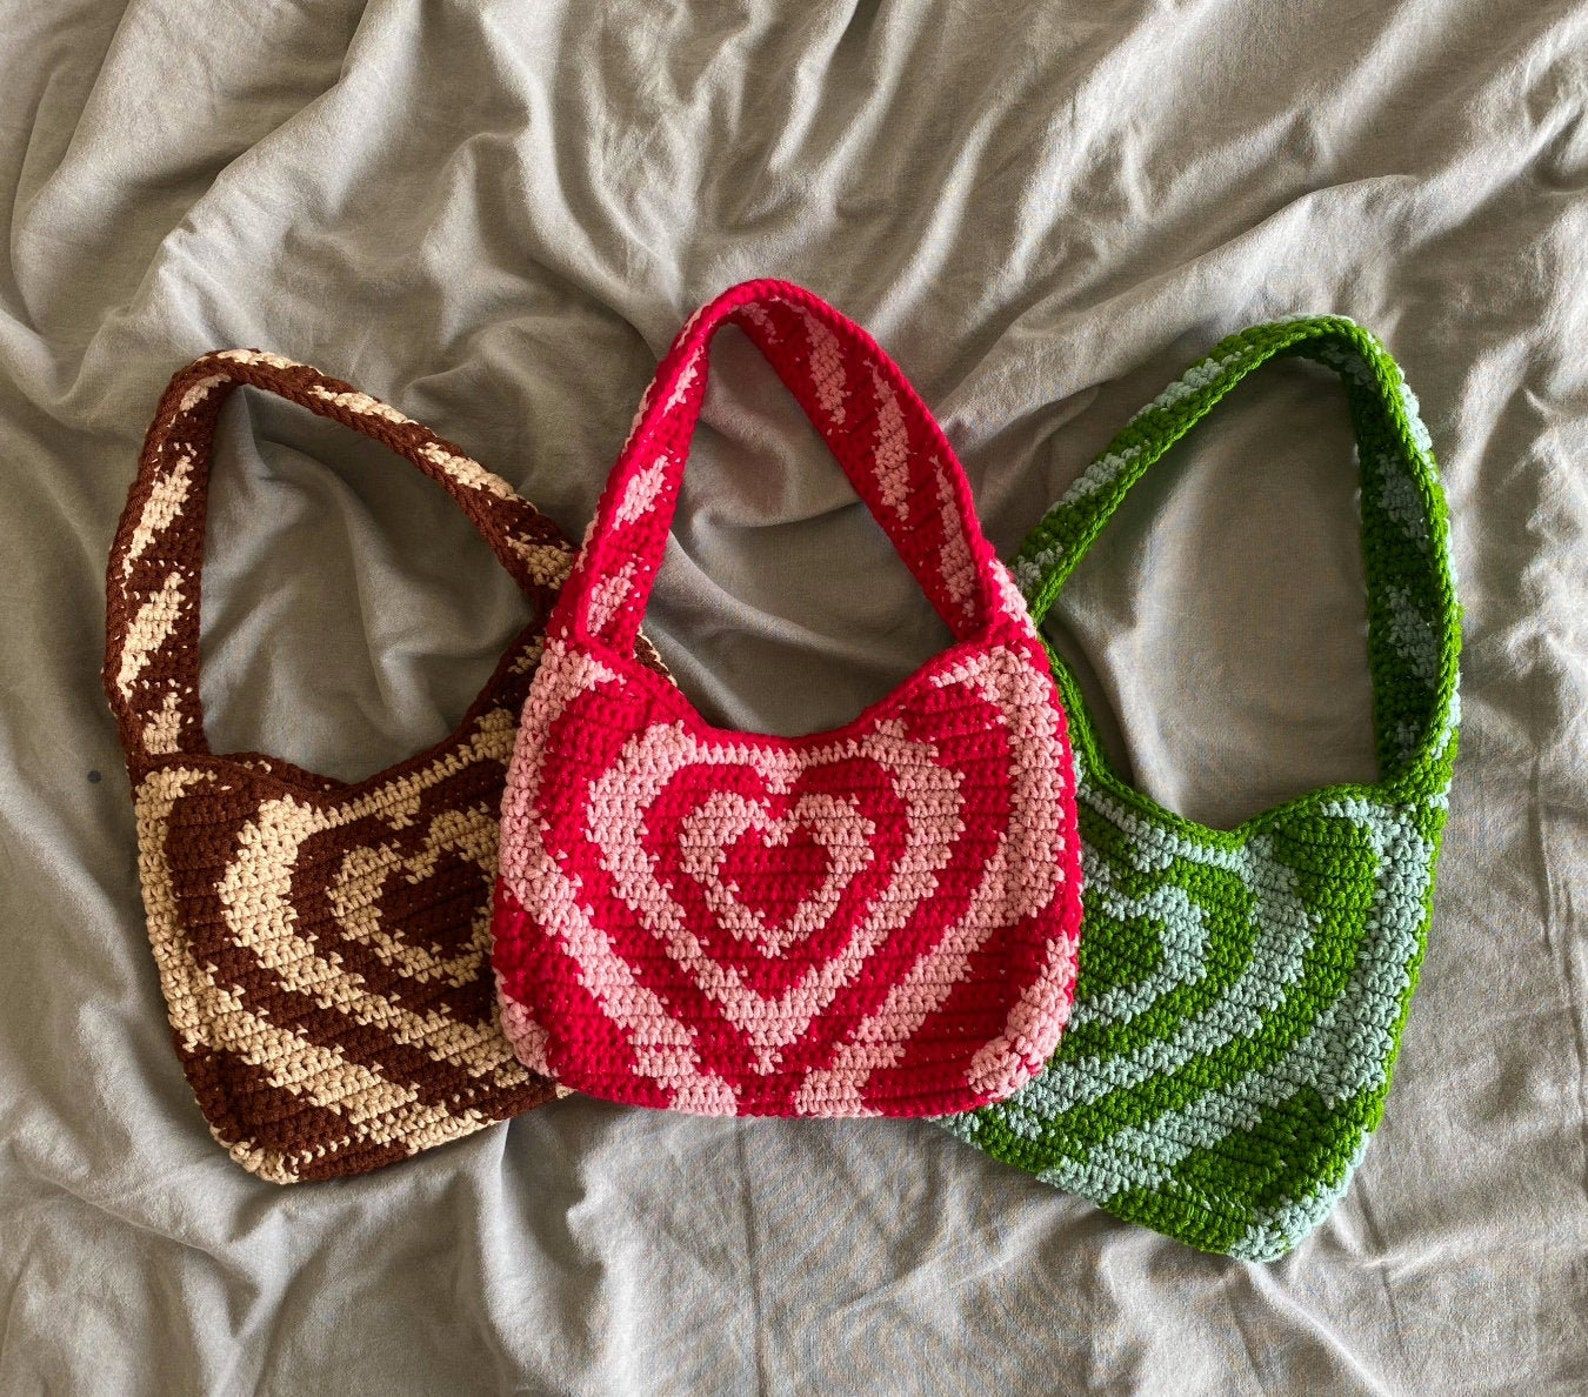 Gift Yourself A Crochet Purse On Your
Birthday